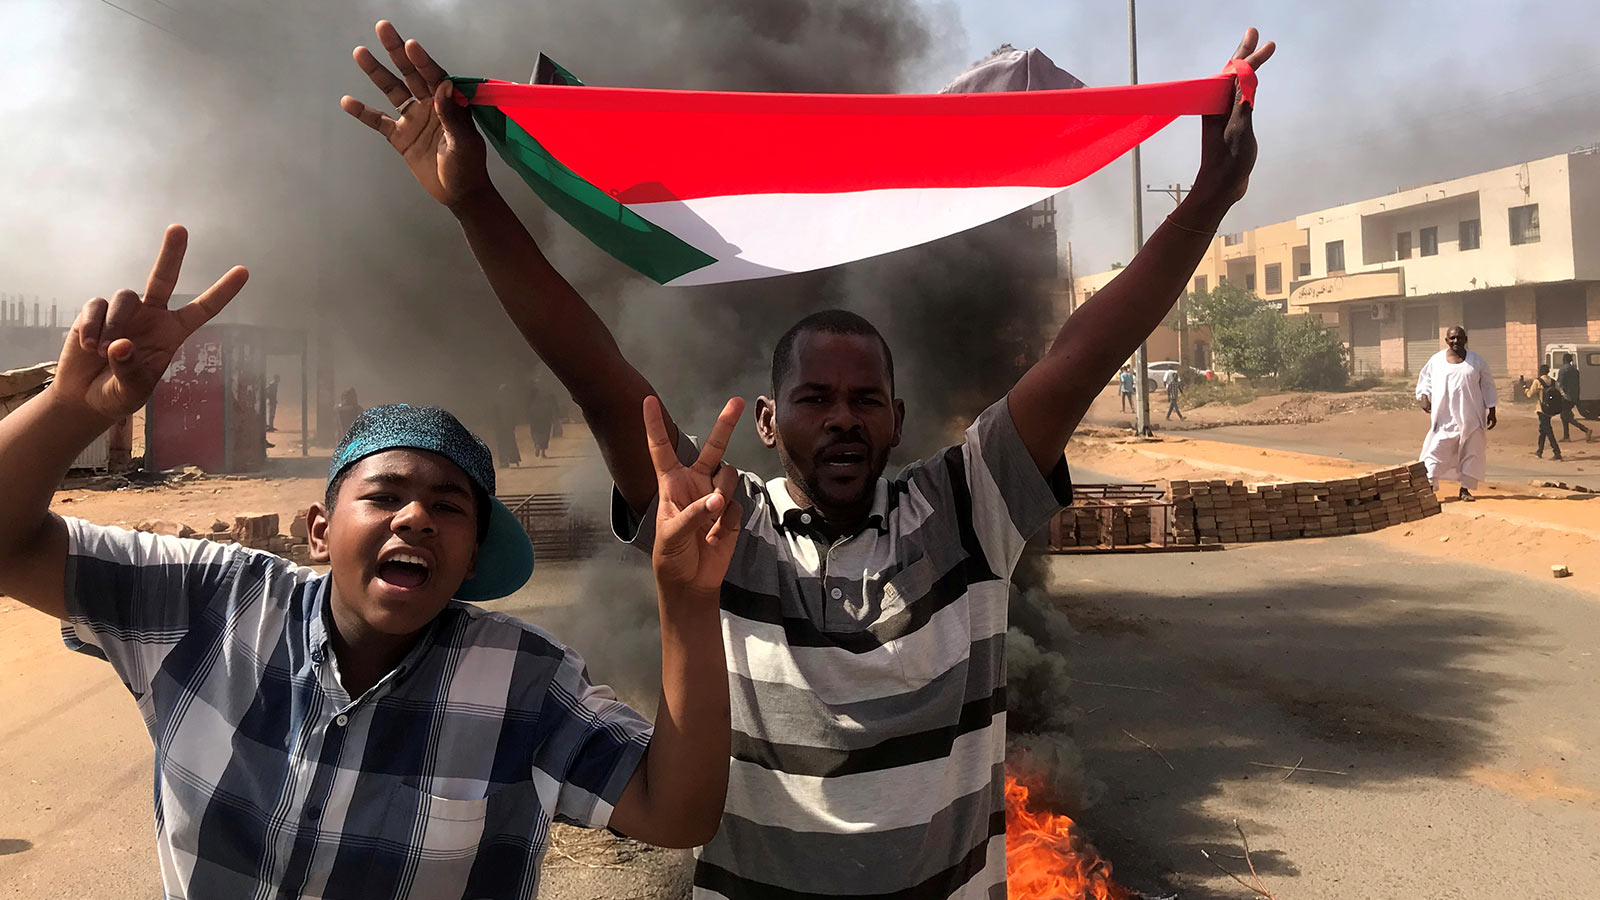 Pan African Unity Dialogue (PAUD) Statement on the Crisis in Sudan